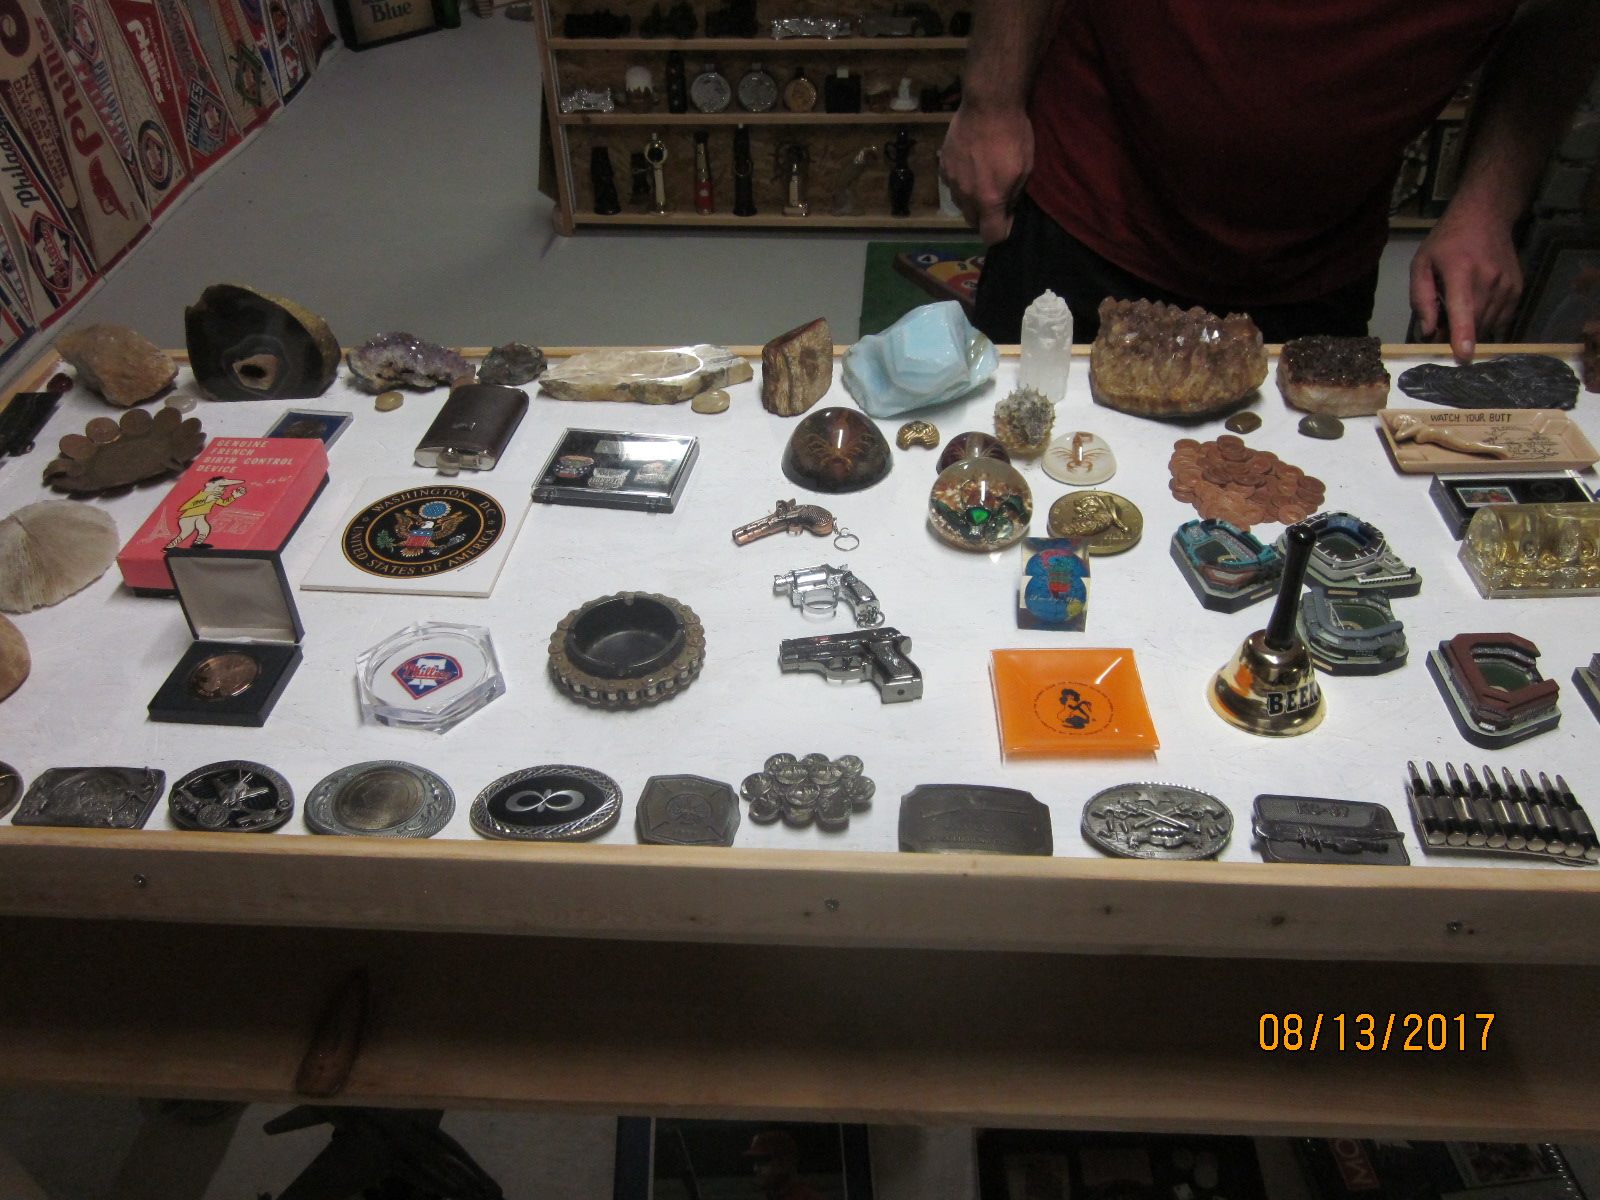 Friends Discover an Amazing Collection After Their Friend Passed Away